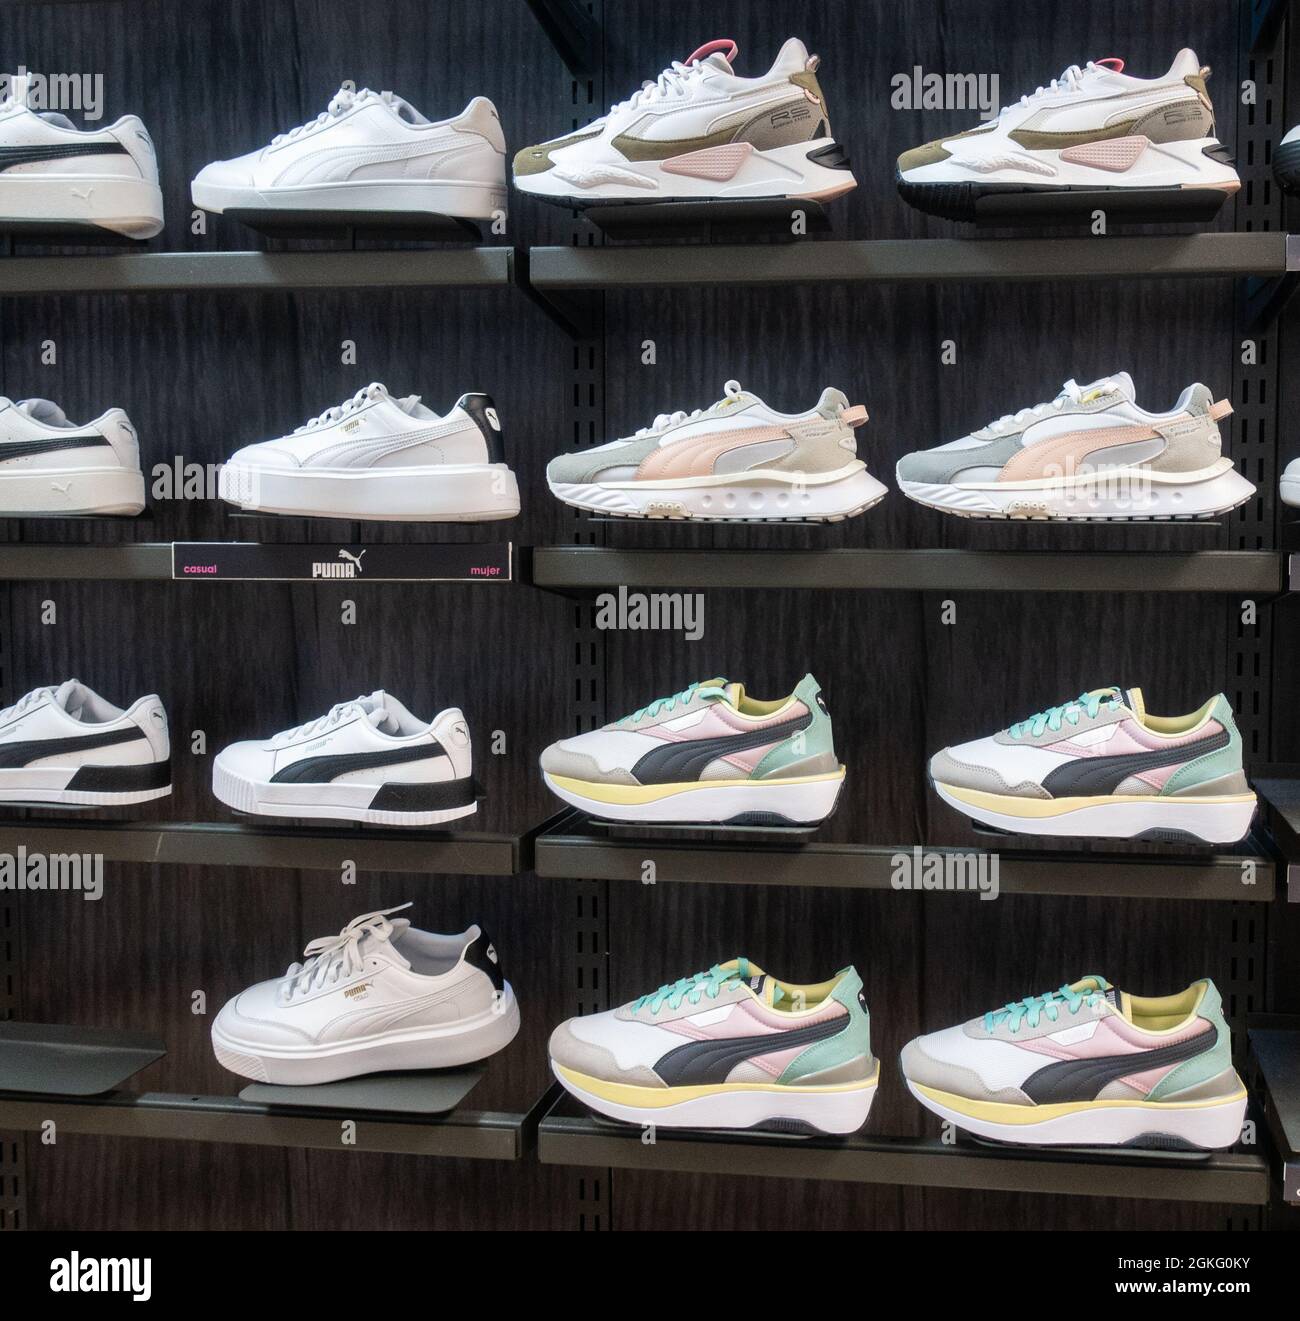 Puma trainers, training shoes store display Stock Photo - Alamy